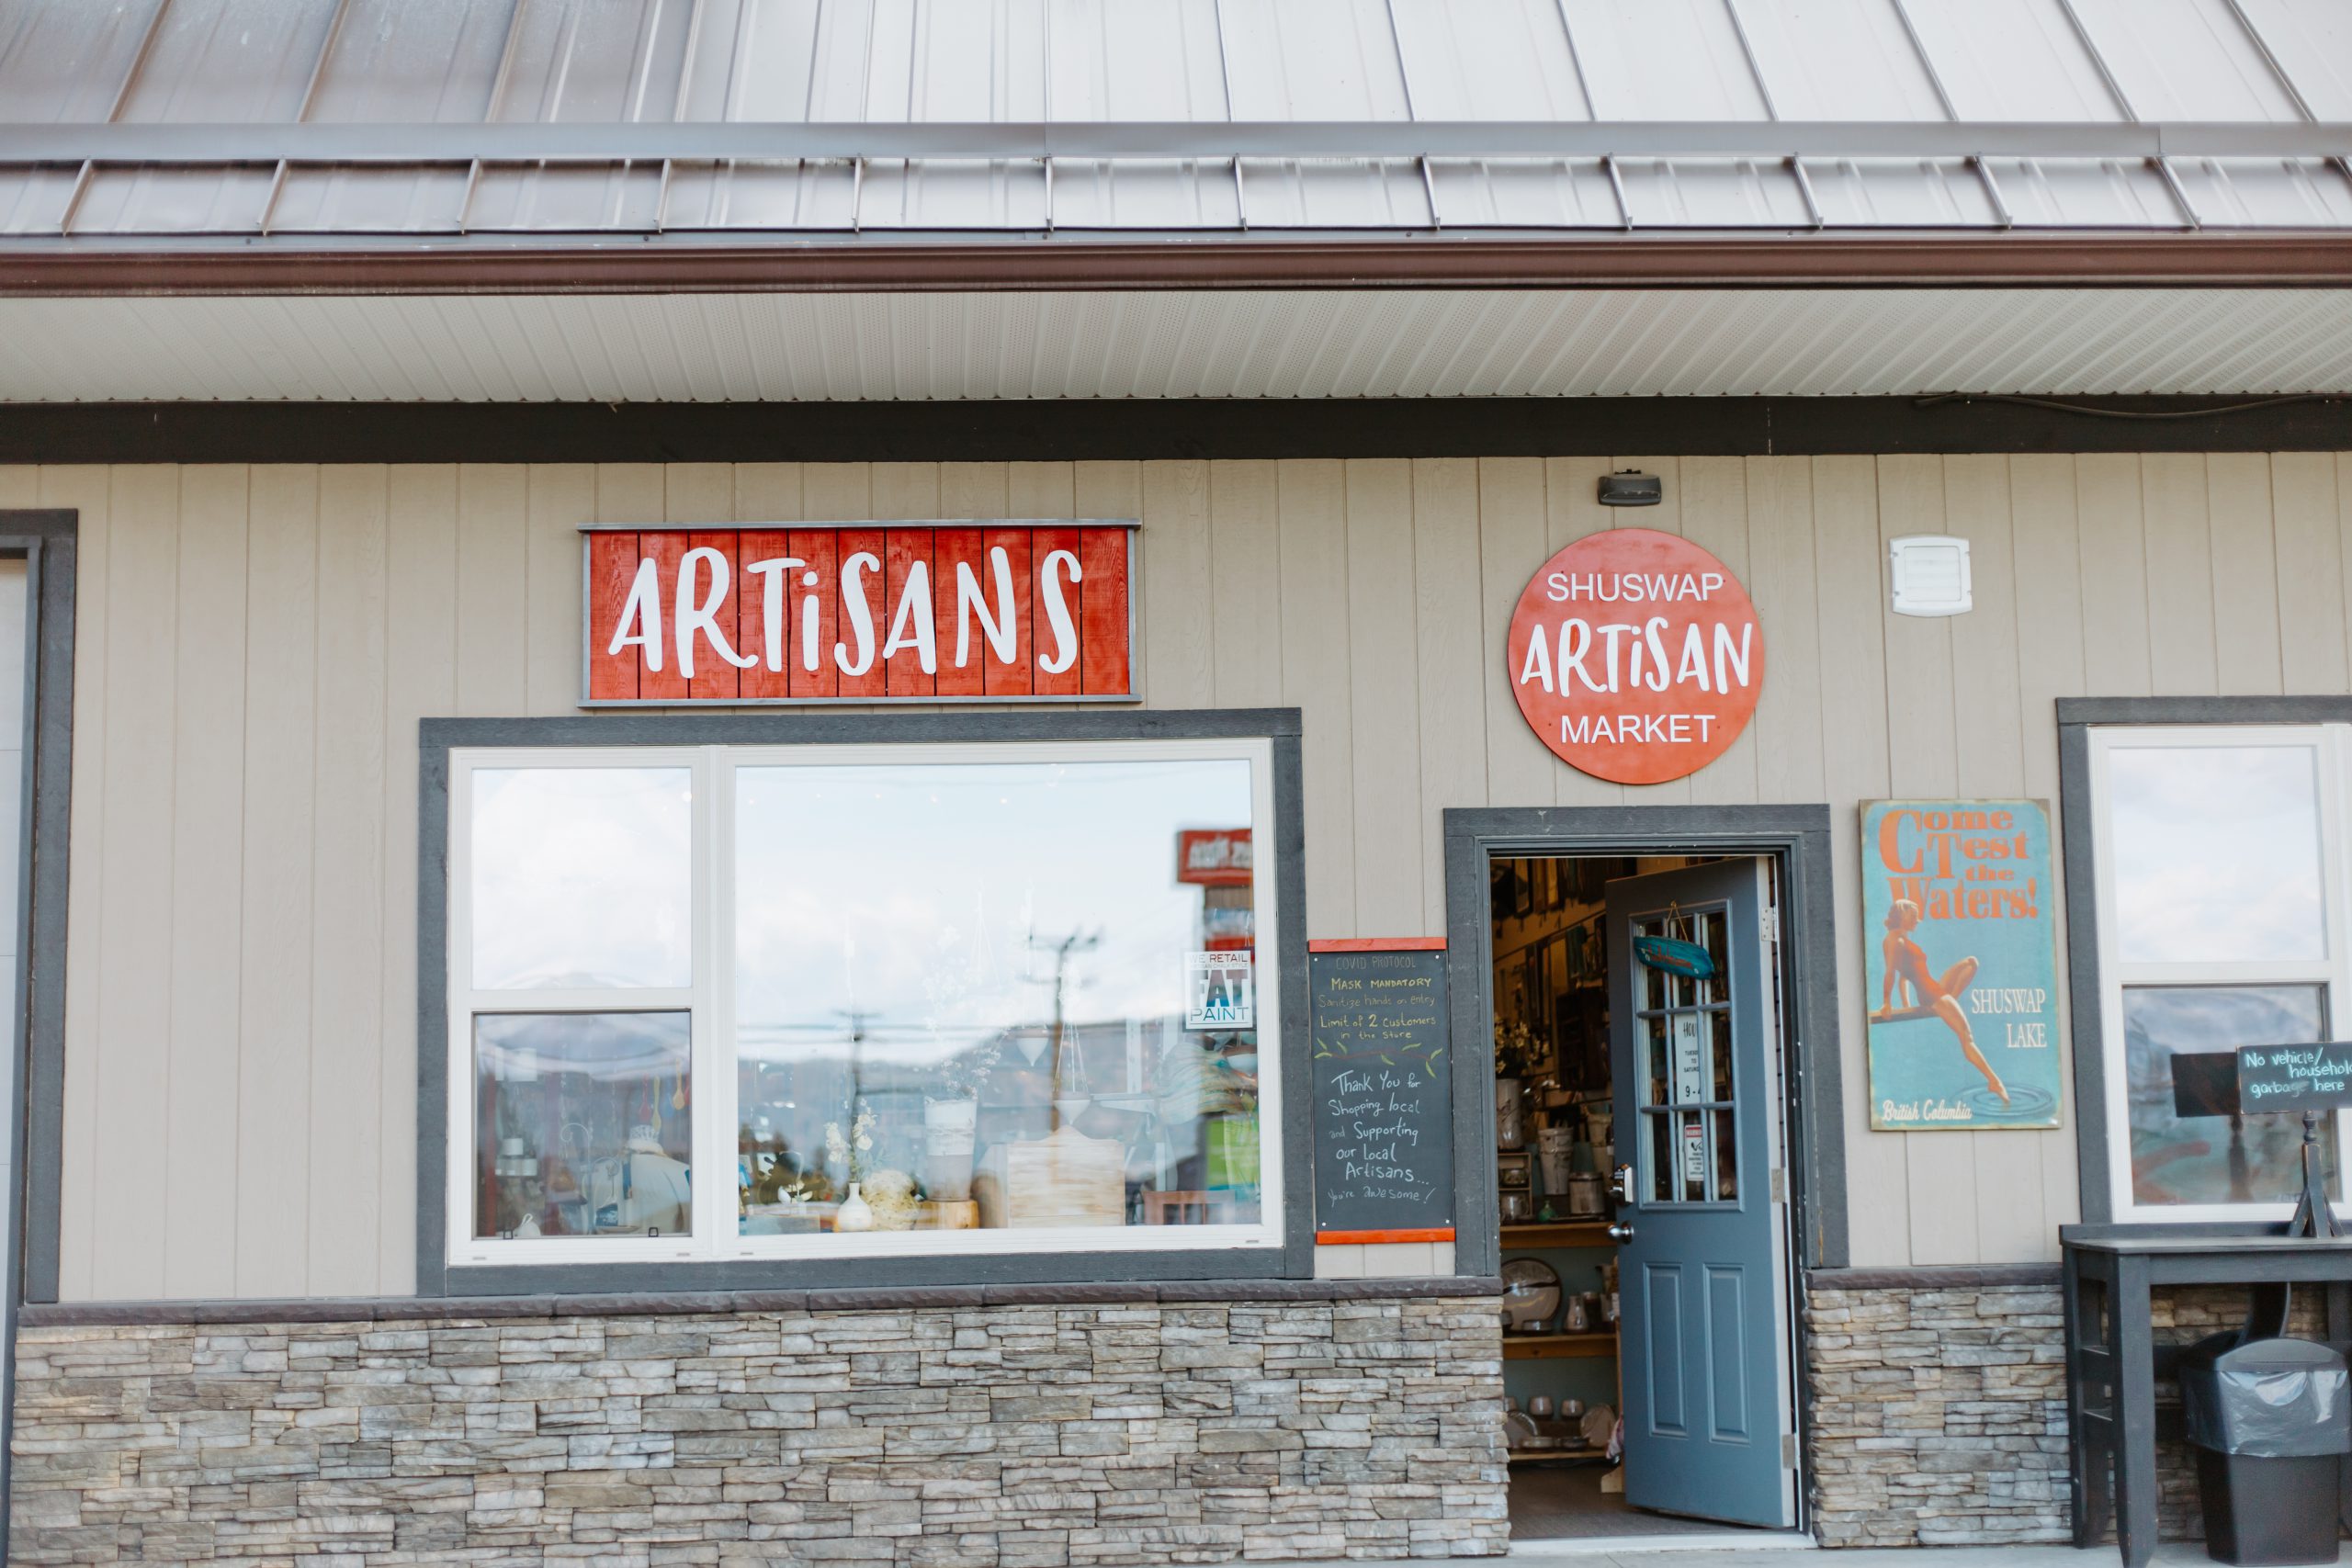 Shuswap Artisan Market: Shuswap Artisan Market is a treasure-trove of handmade art showcasing over 20 local artisans. The market is open Tuesdays through Saturdays, 10:00 to 4:00 pm.